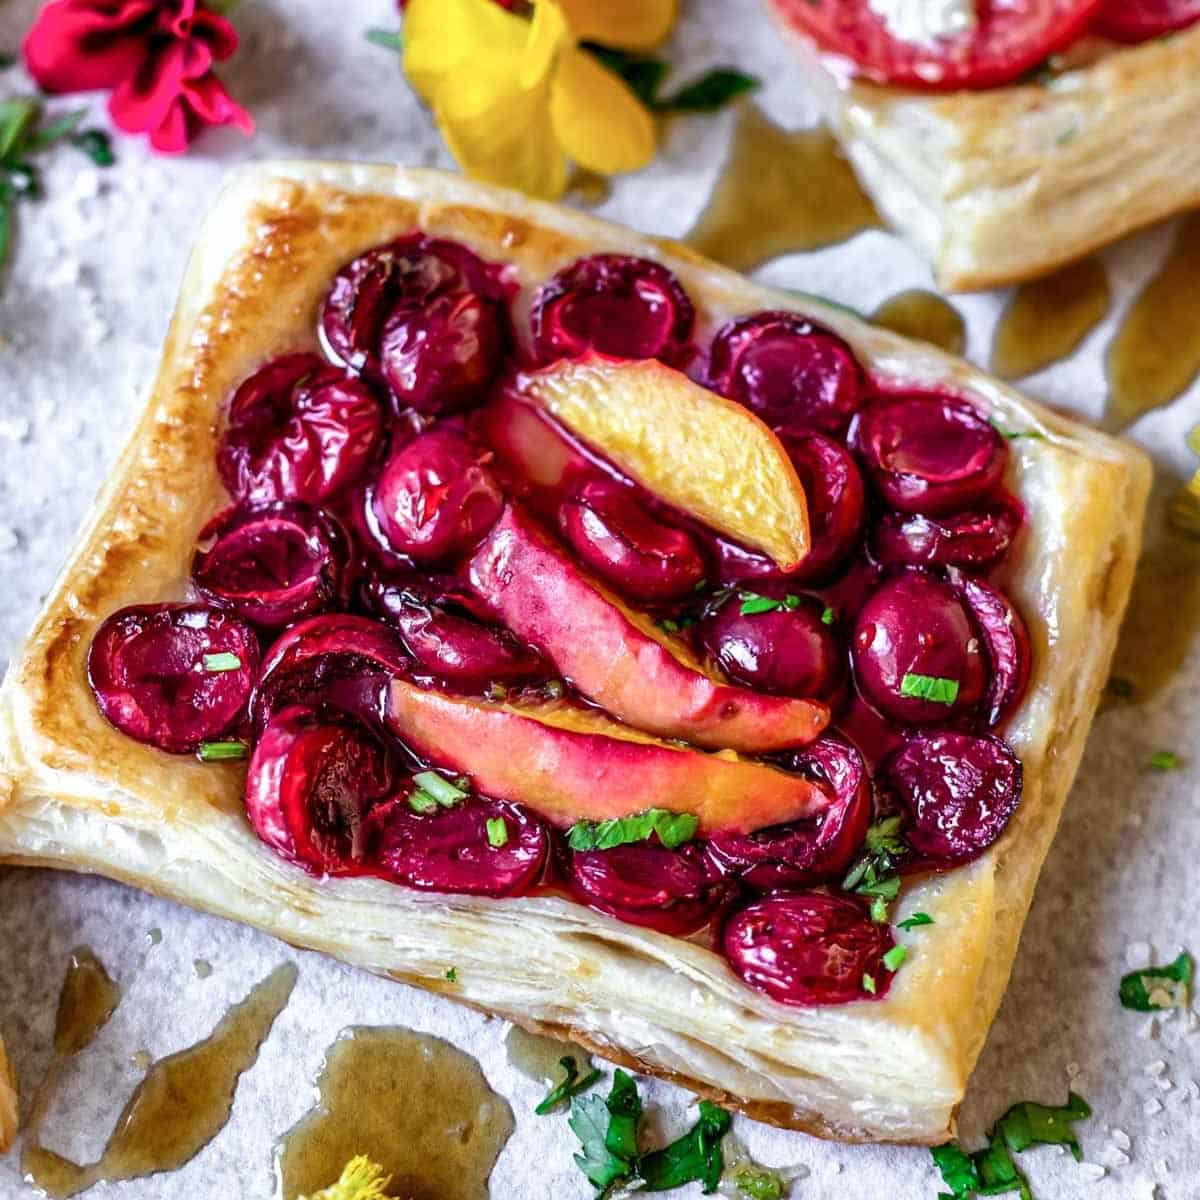 Baked gluten free puff pastry with peach.